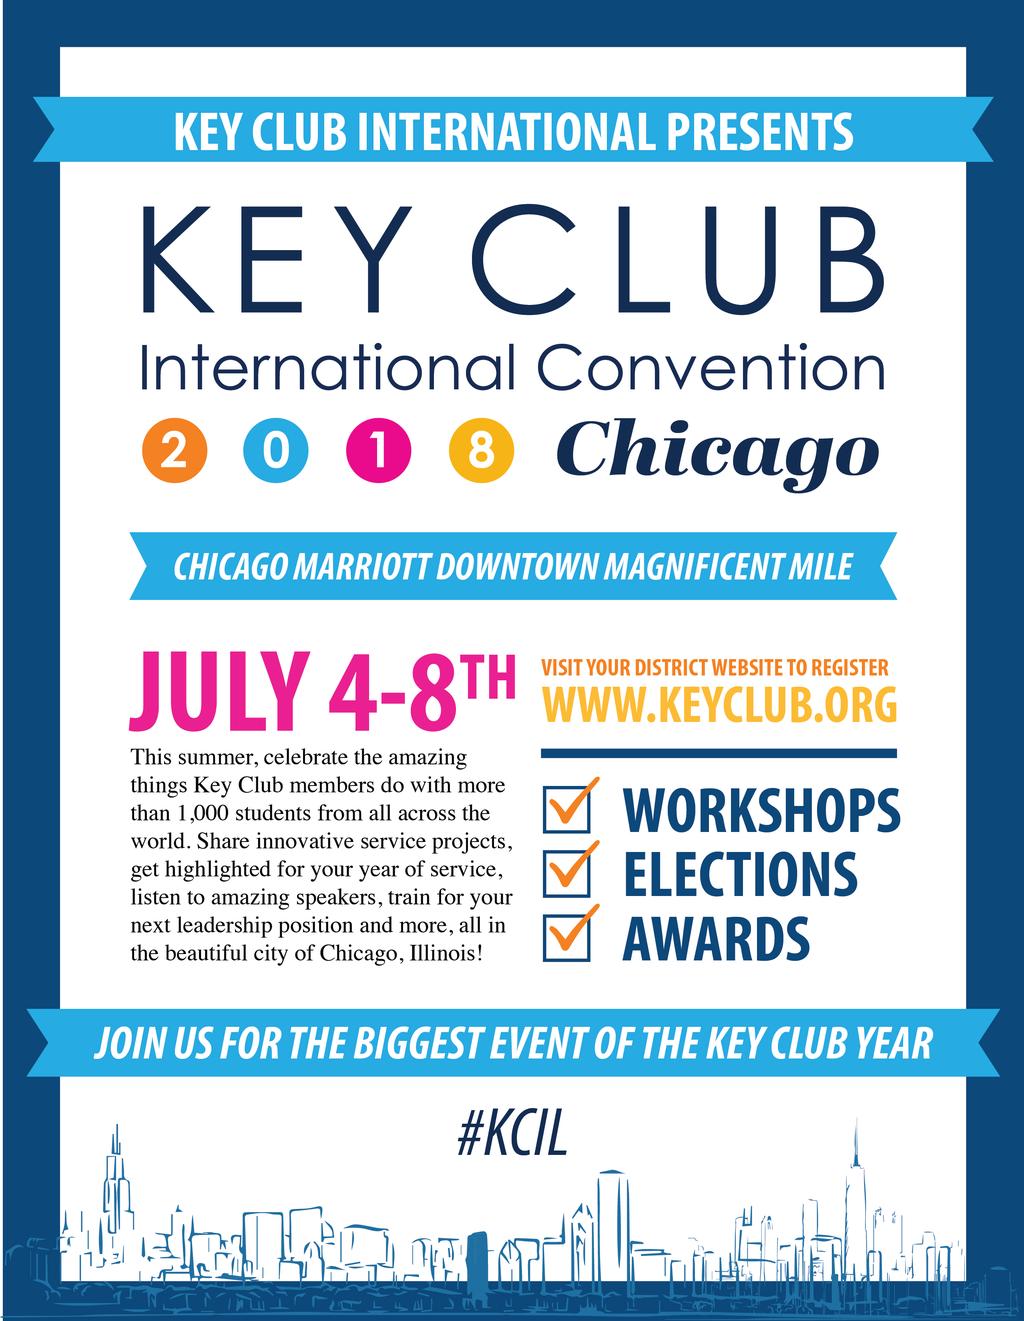 The BIGGEST event of the Key Club year is almost here! At this convention, we will be celebrating the amazing things Key Club members do with more than 1,500 students from all across the world.